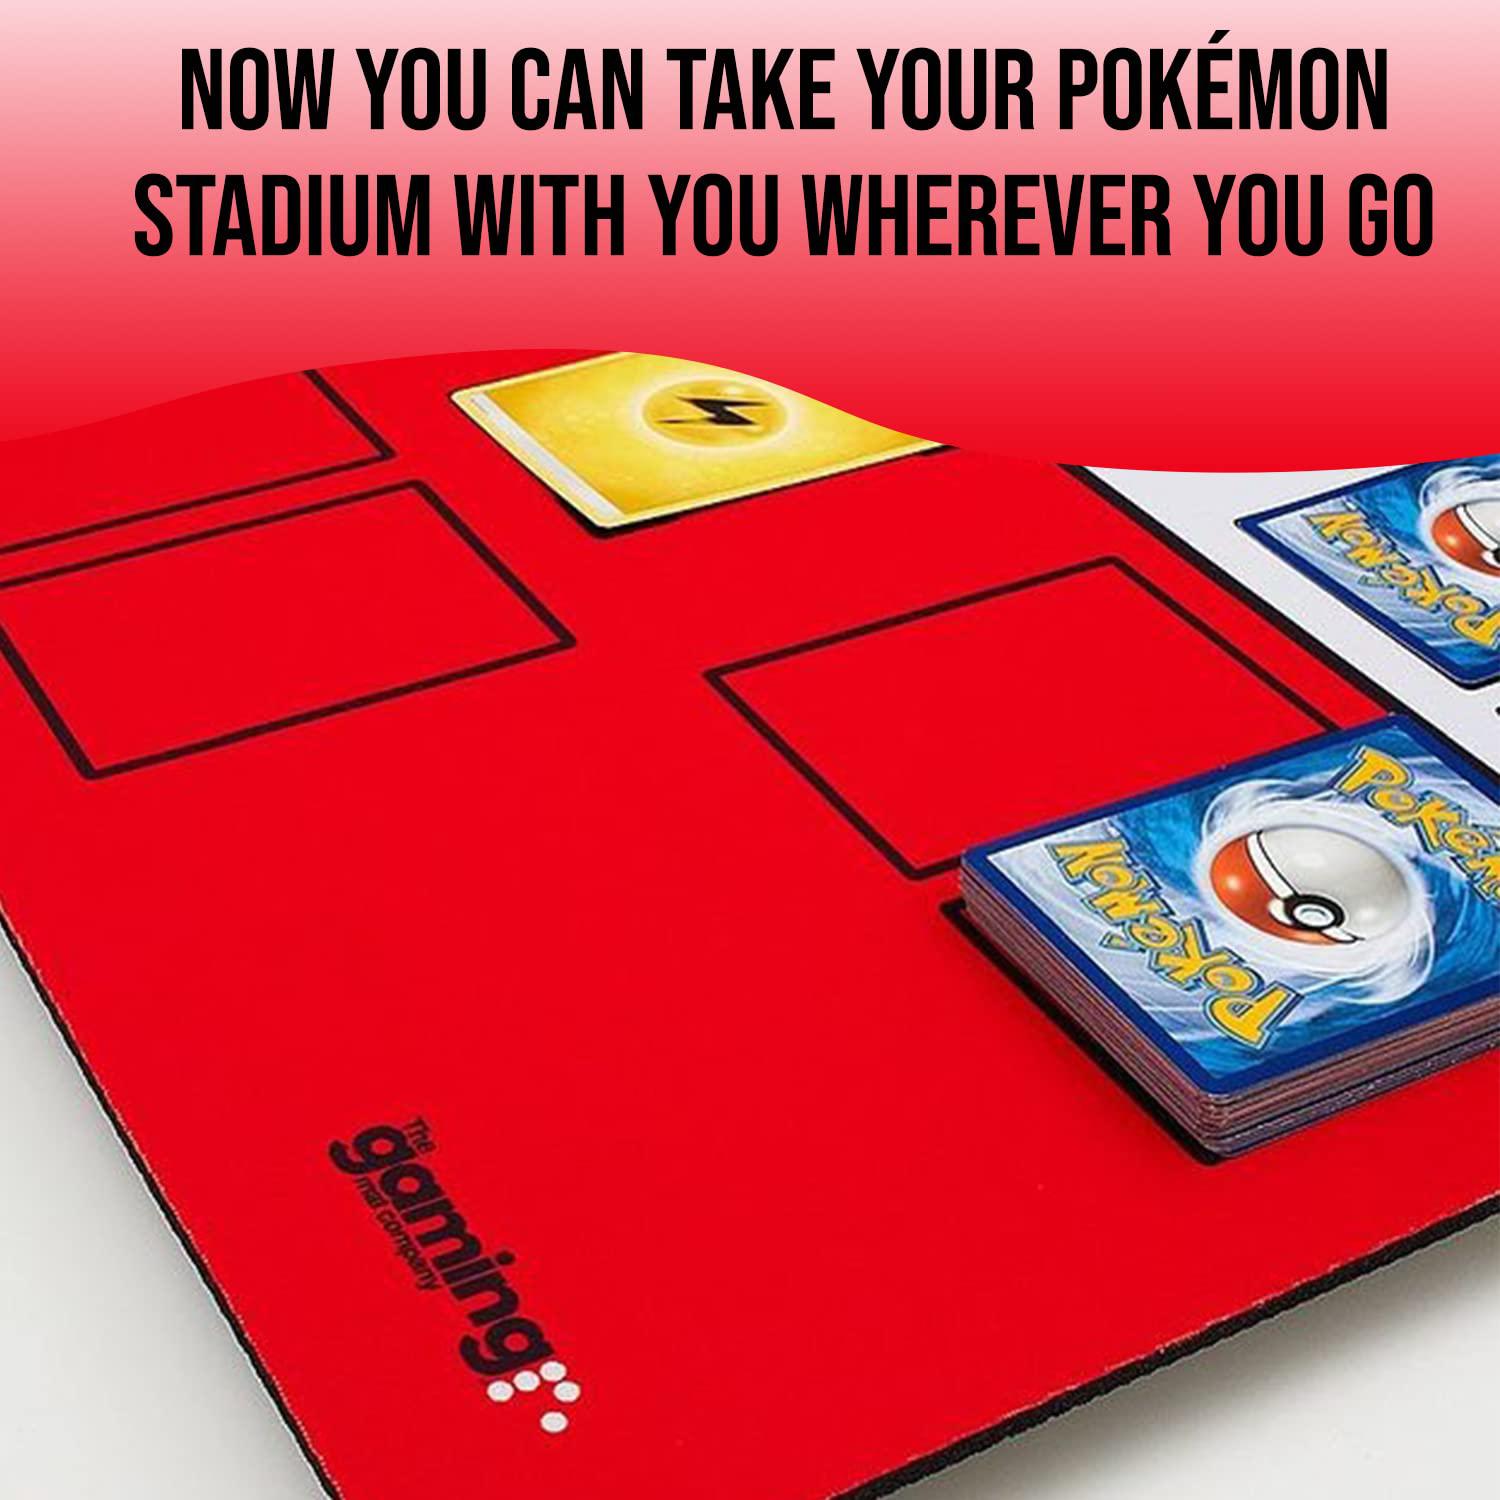 the gaming mat company 2 player compatible pokemon playmat for pokemon cards- xl 28.3" x 28.3" 2player battle mat stadium boa